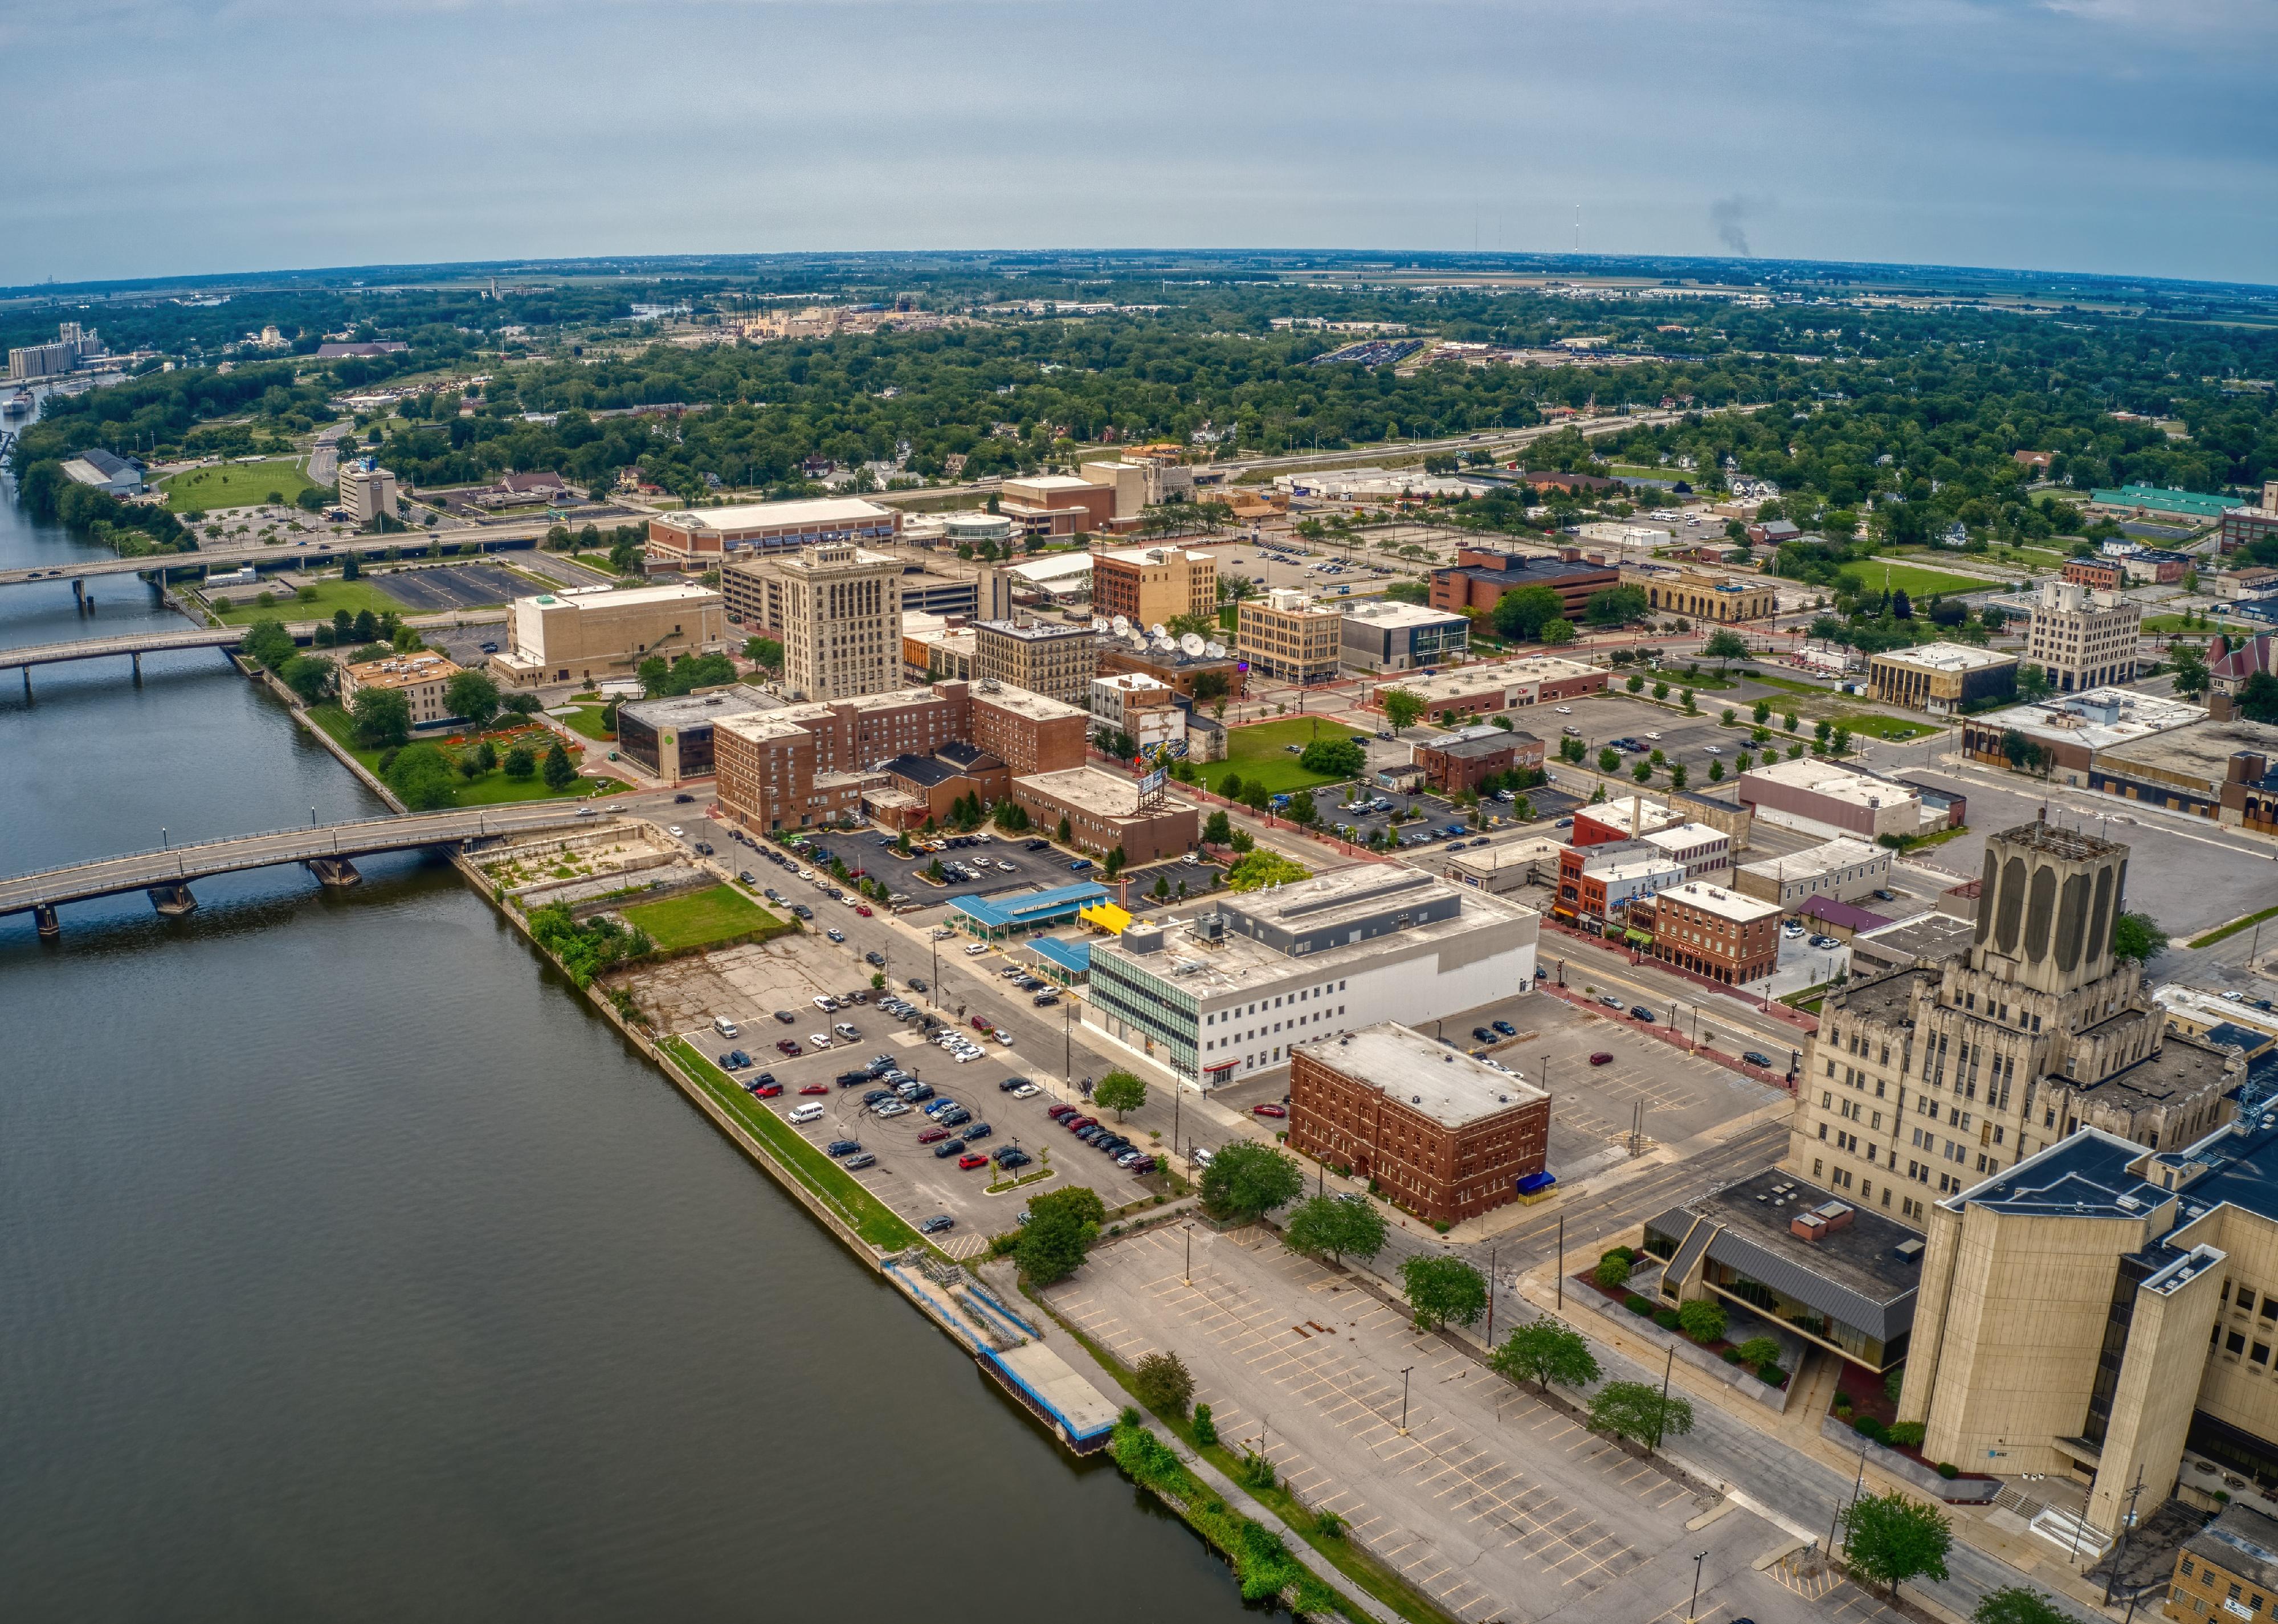 Aerial View of Saginaw, Michigan during Summer.